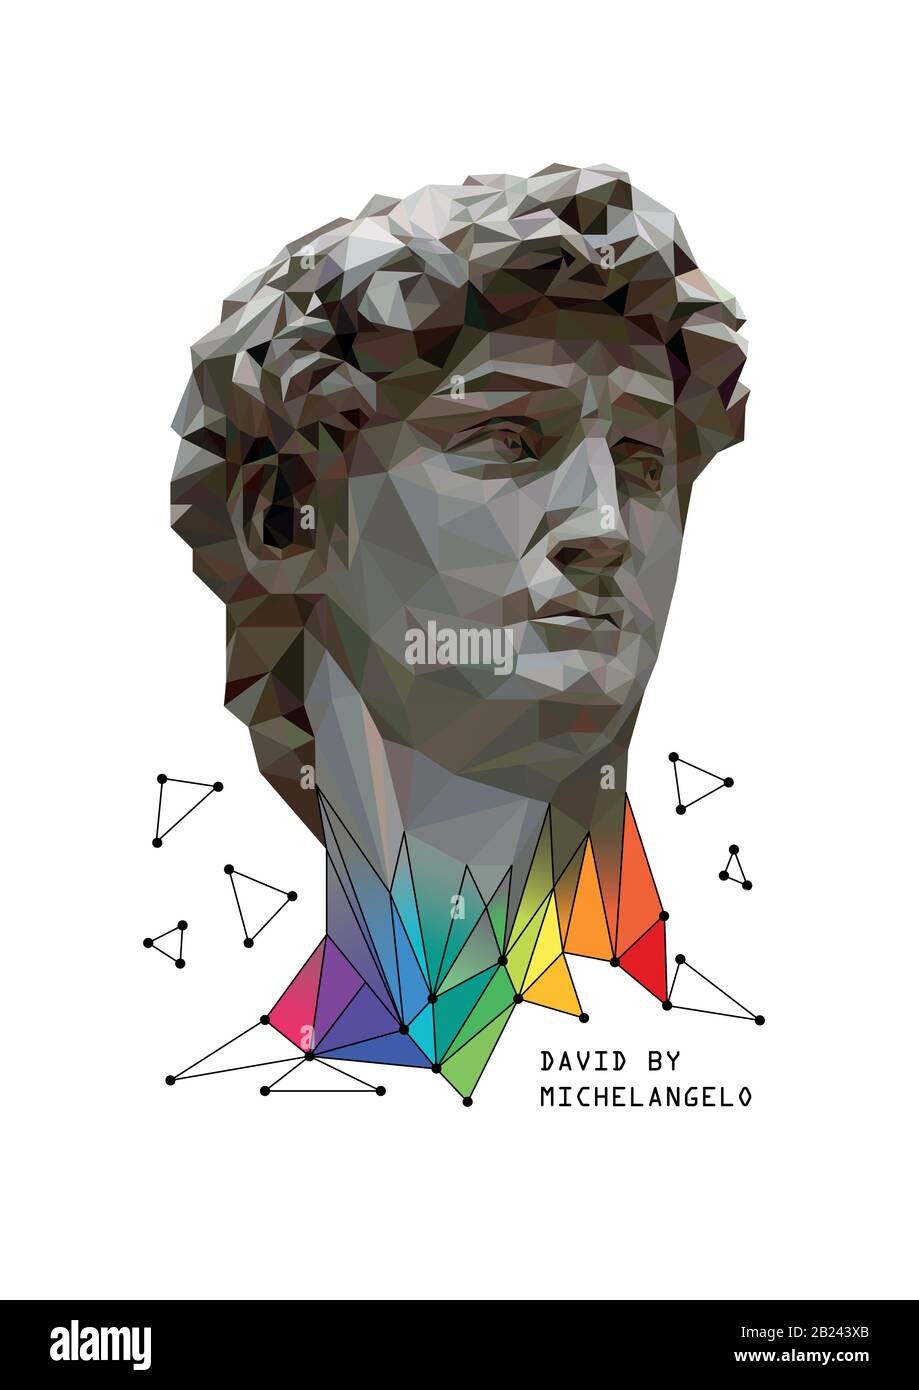 Abstract Illustration of David by Michelangelo with colorful elements. White background. Low poly Style. Vector illustration. Stock Vector